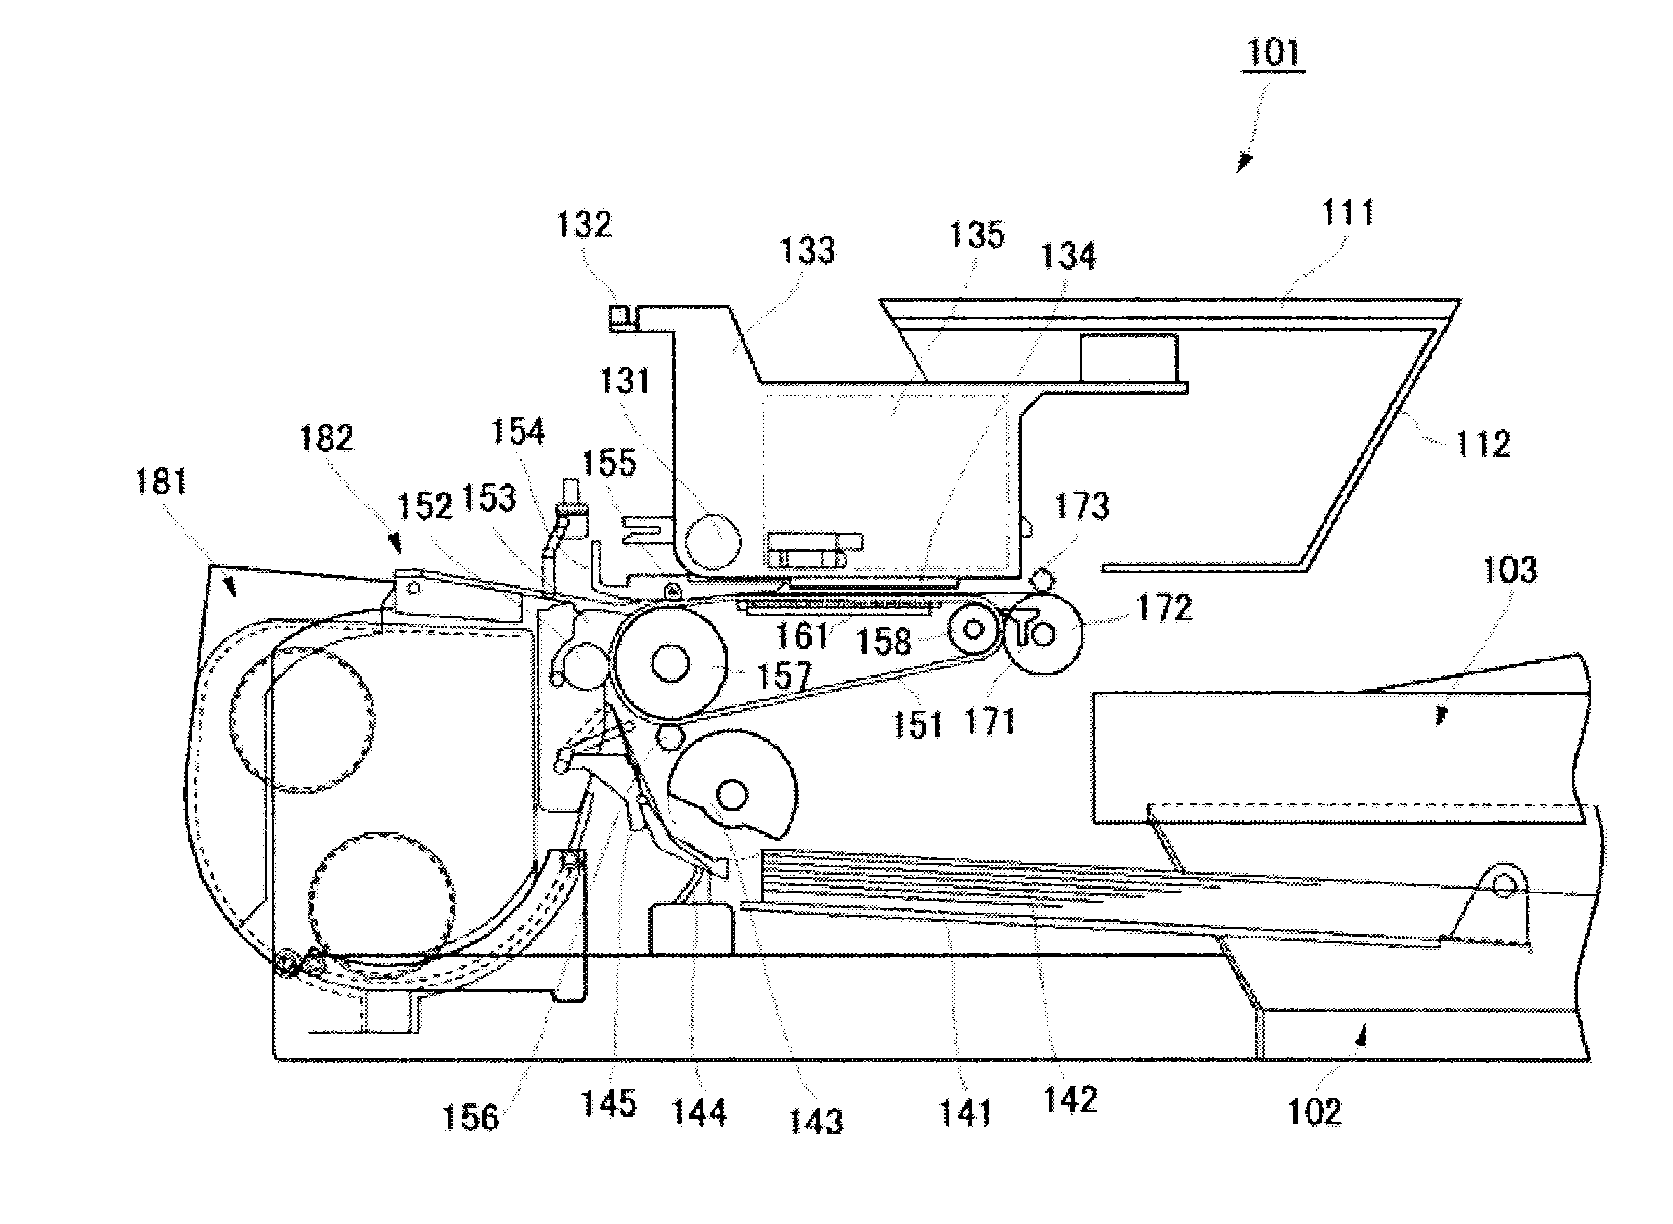 Inkjet recording apparatus, method for inkjet recording, and ink